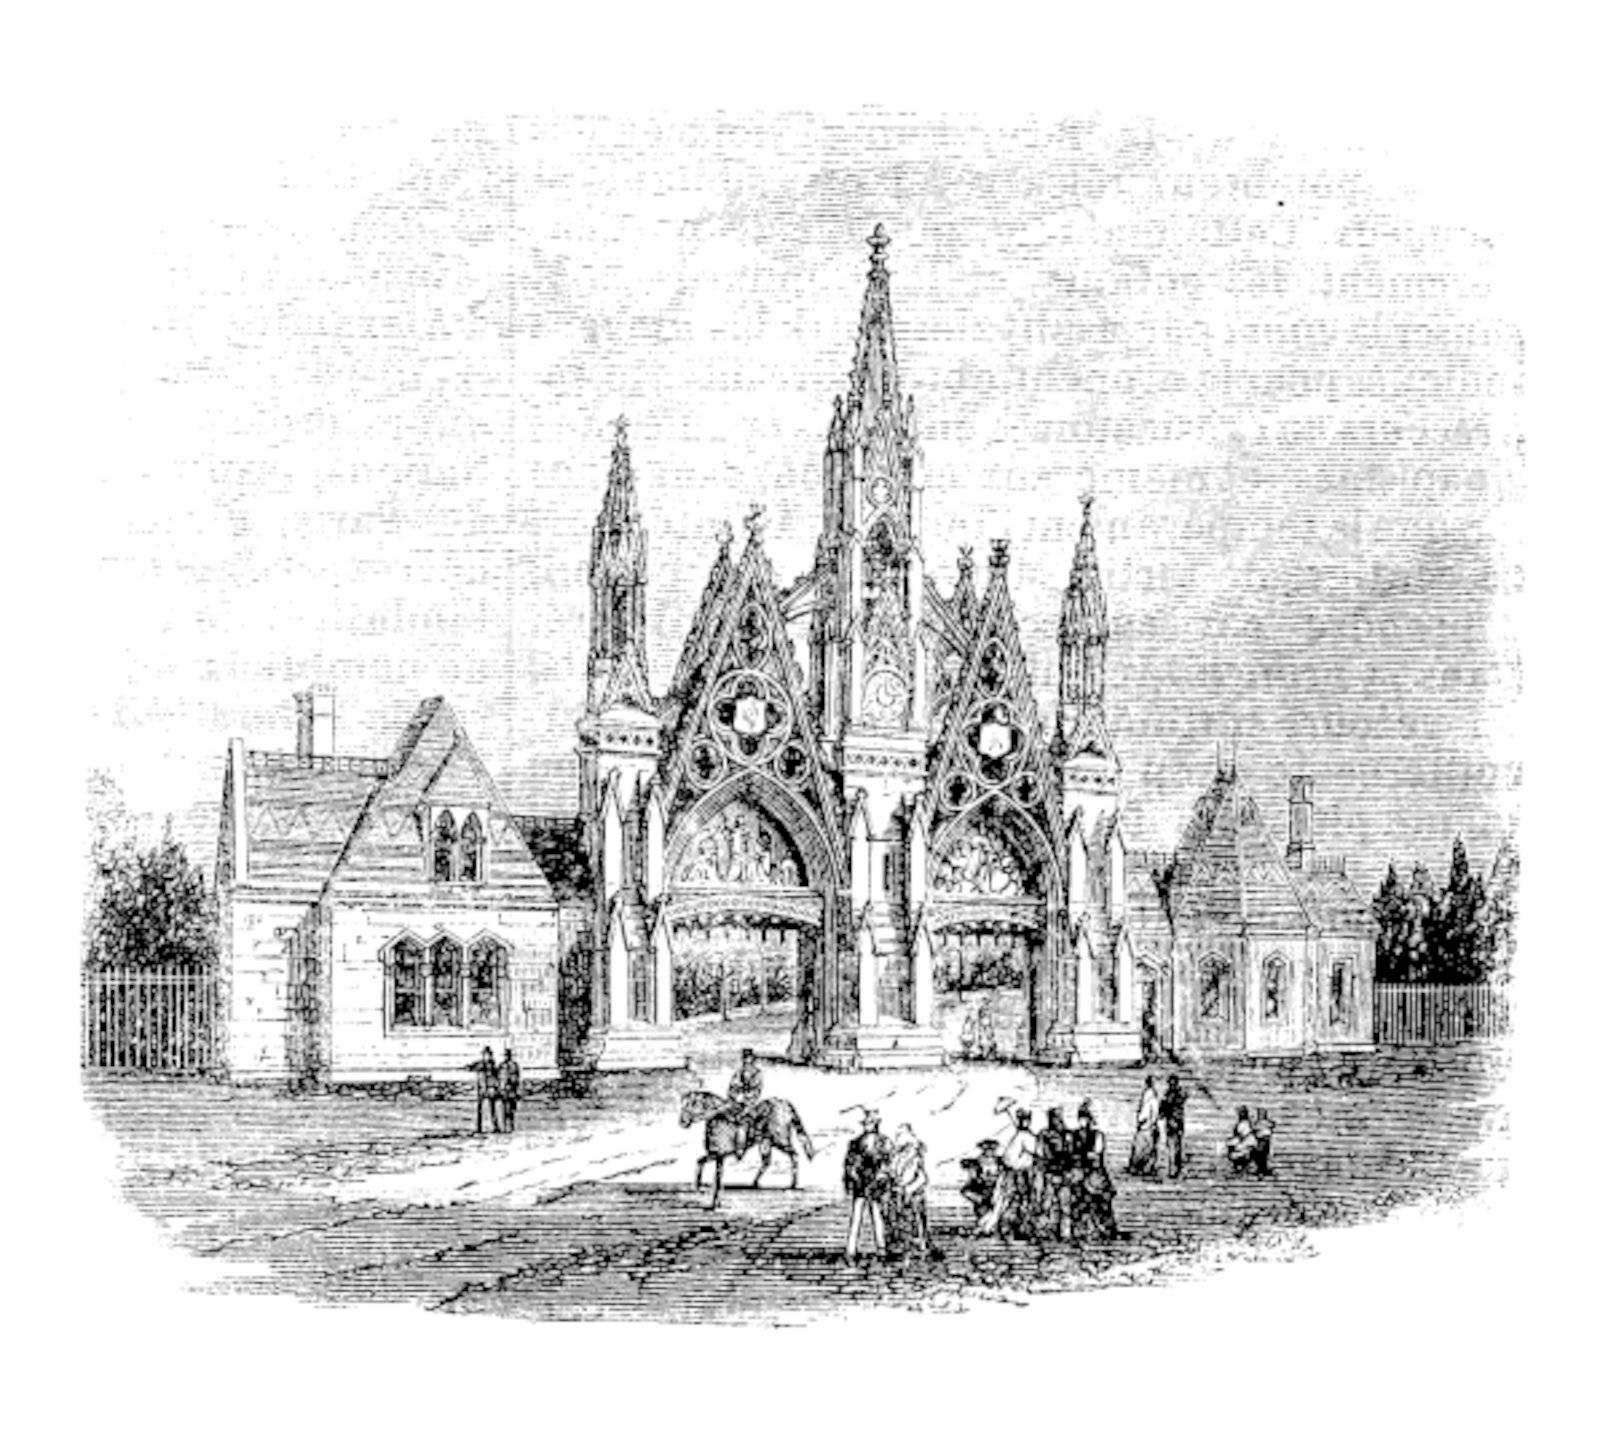 The entrance of GreenWood Cemetery at Brooklyn, United States. Vintage engraving from 1890s. Old engraved illustration of the Greenwood cemetery gates, with a horseman and people nearby.